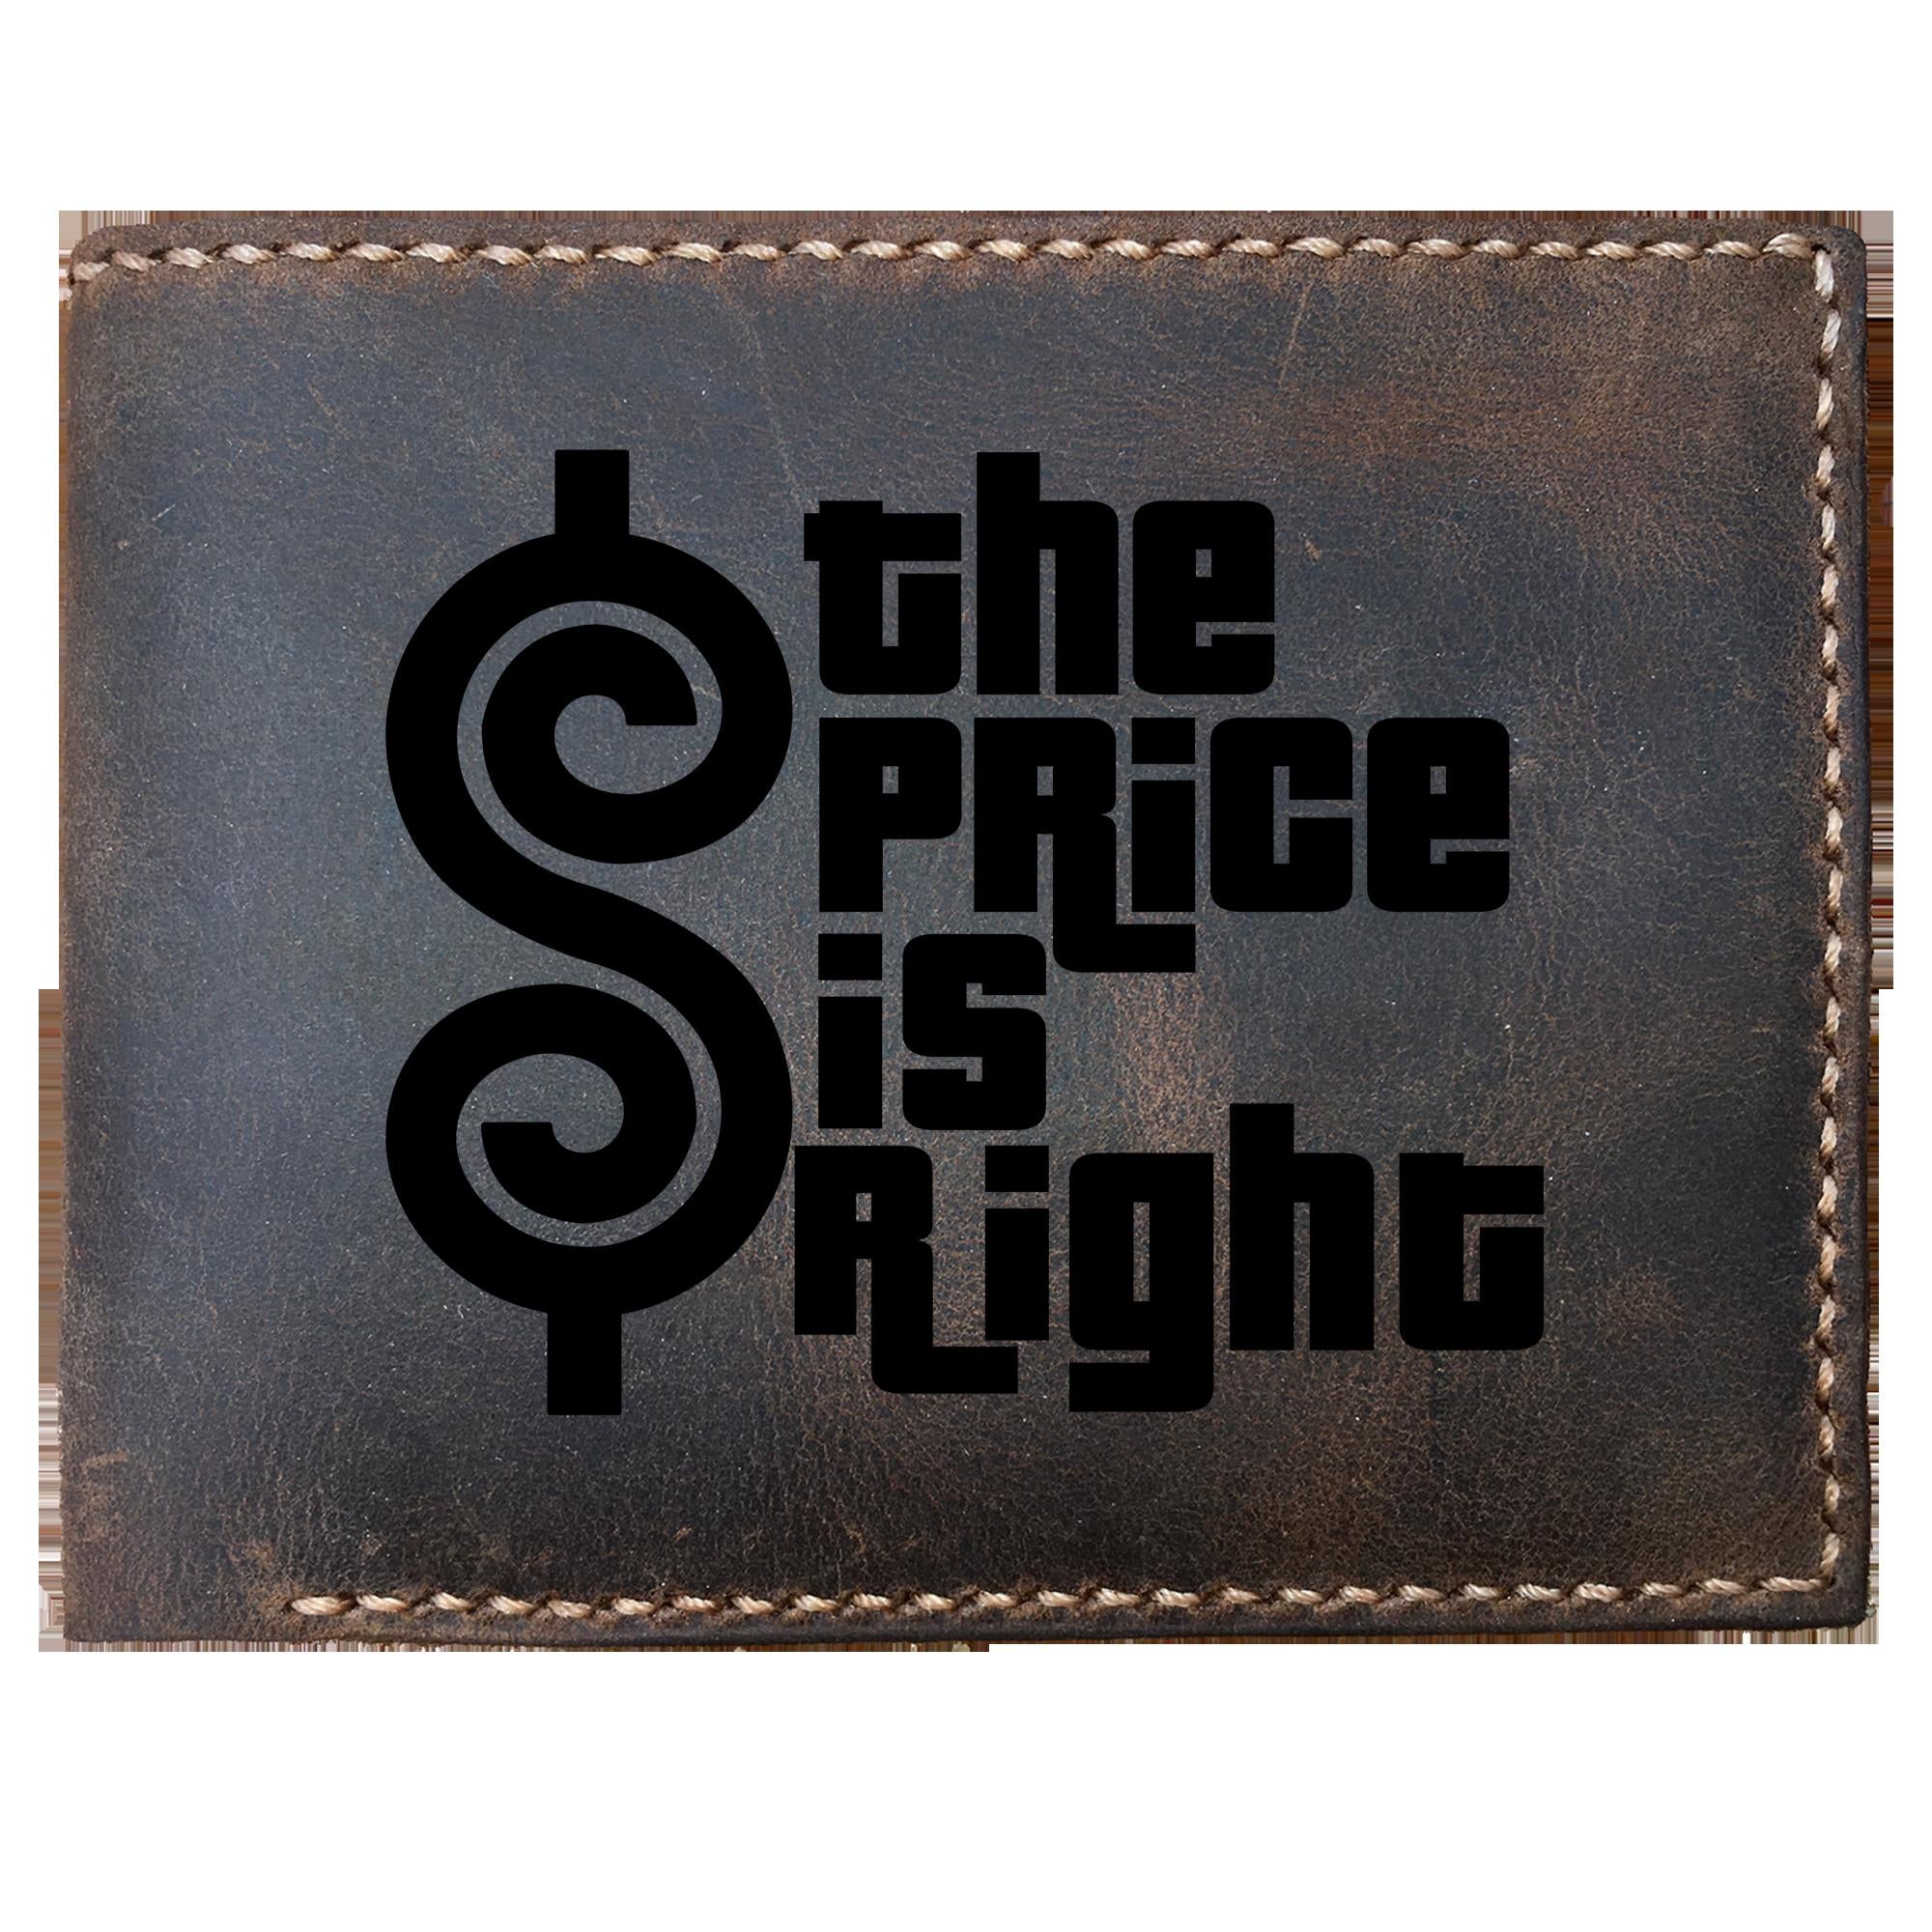 Skitongifts Funny Custom Laser Engraved Bifold Leather Wallet For Men, Guessing Price The Price Is Right